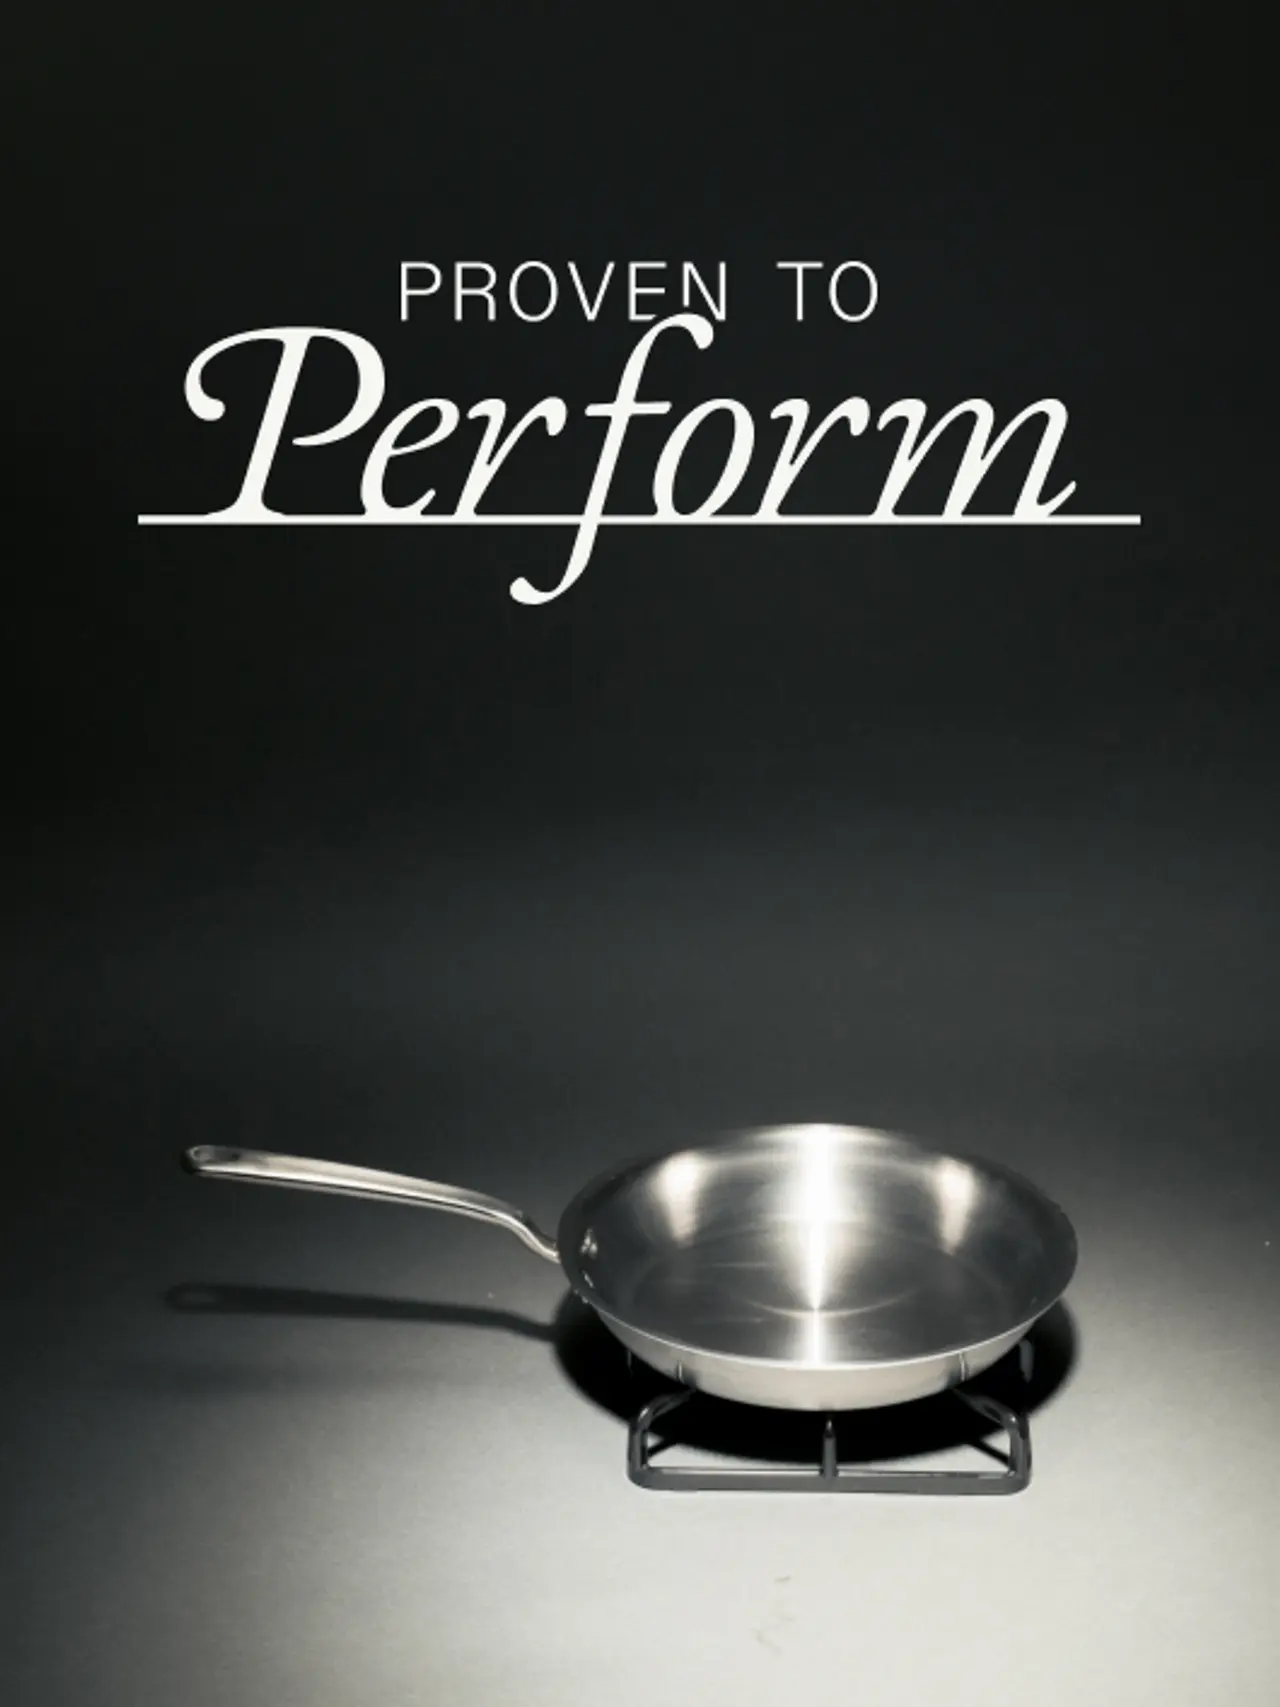 A stainless steel frying pan is centered against a dark background with the phrase "Proven to Perform" above it, possibly suggesting high-quality cookware.